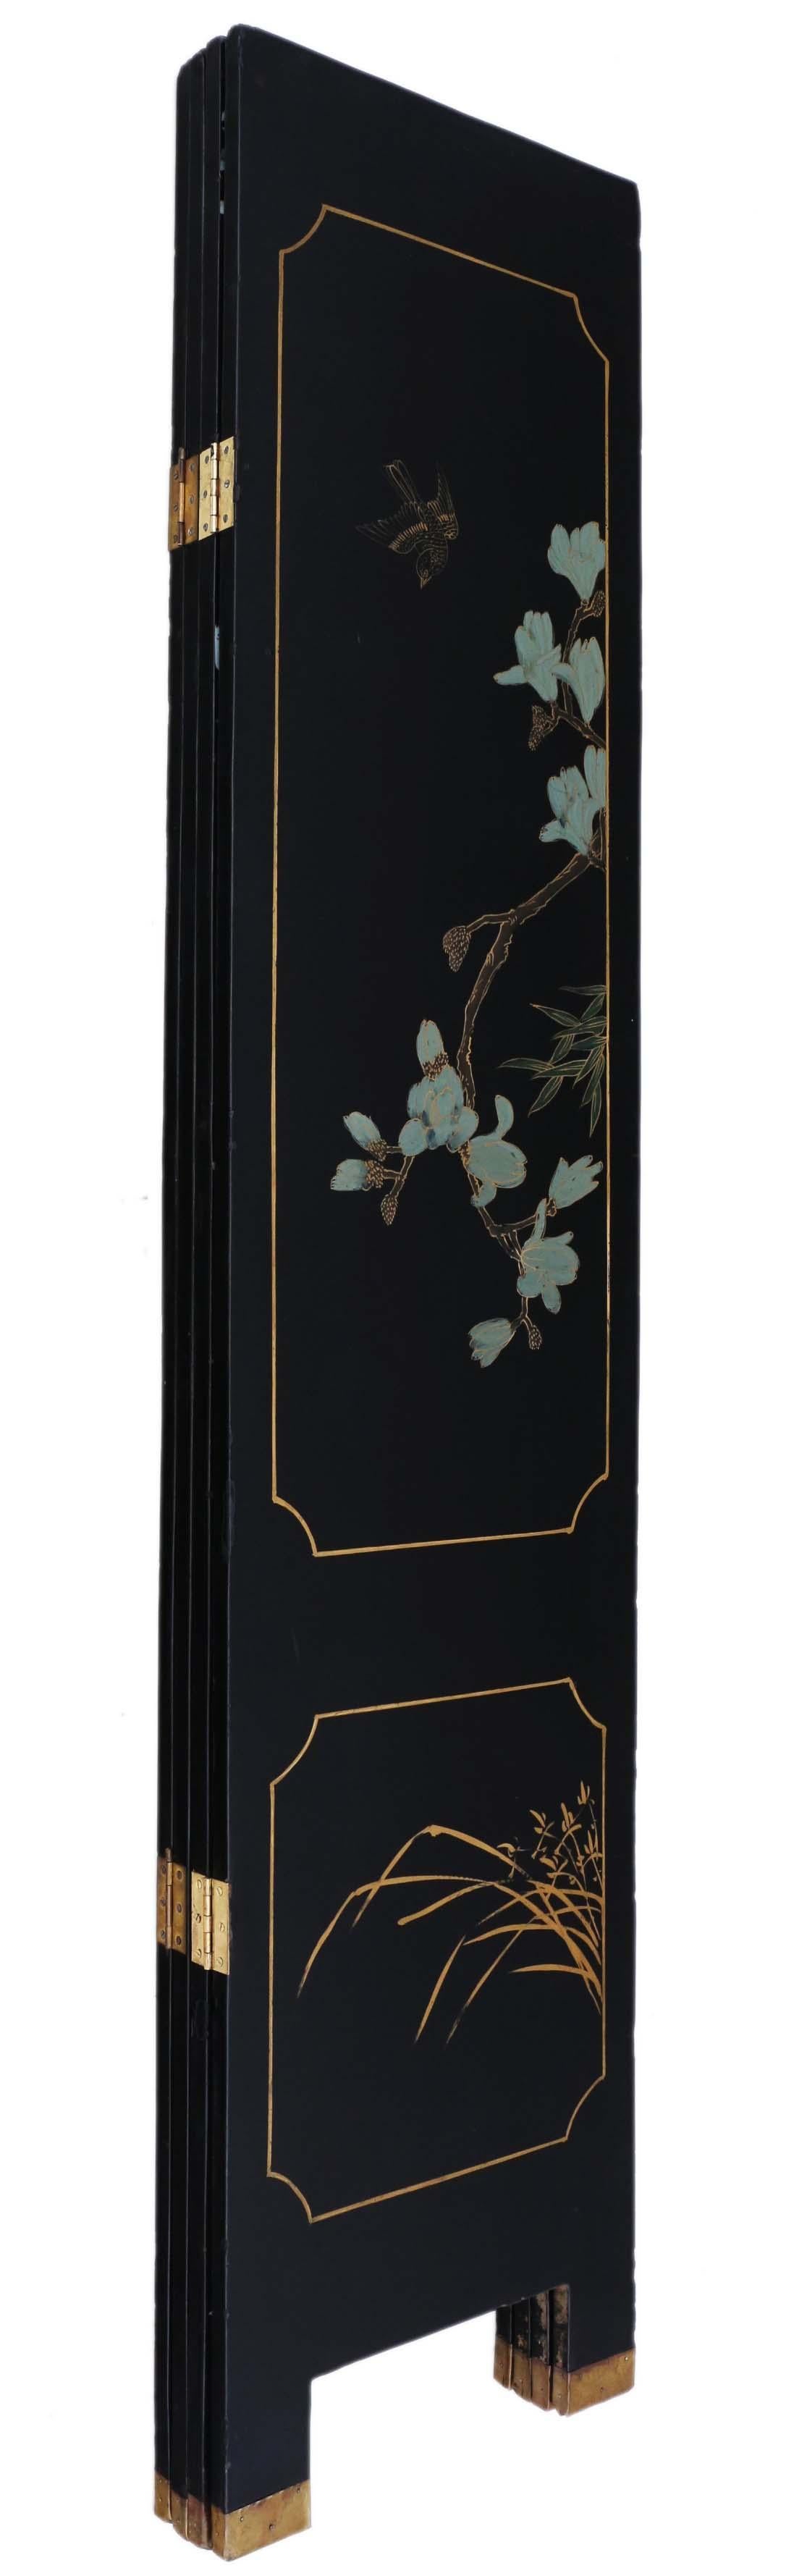 Antique Large Quality Victorian Chinoiserie C1900 Dressing Screen Room Divider For Sale 2